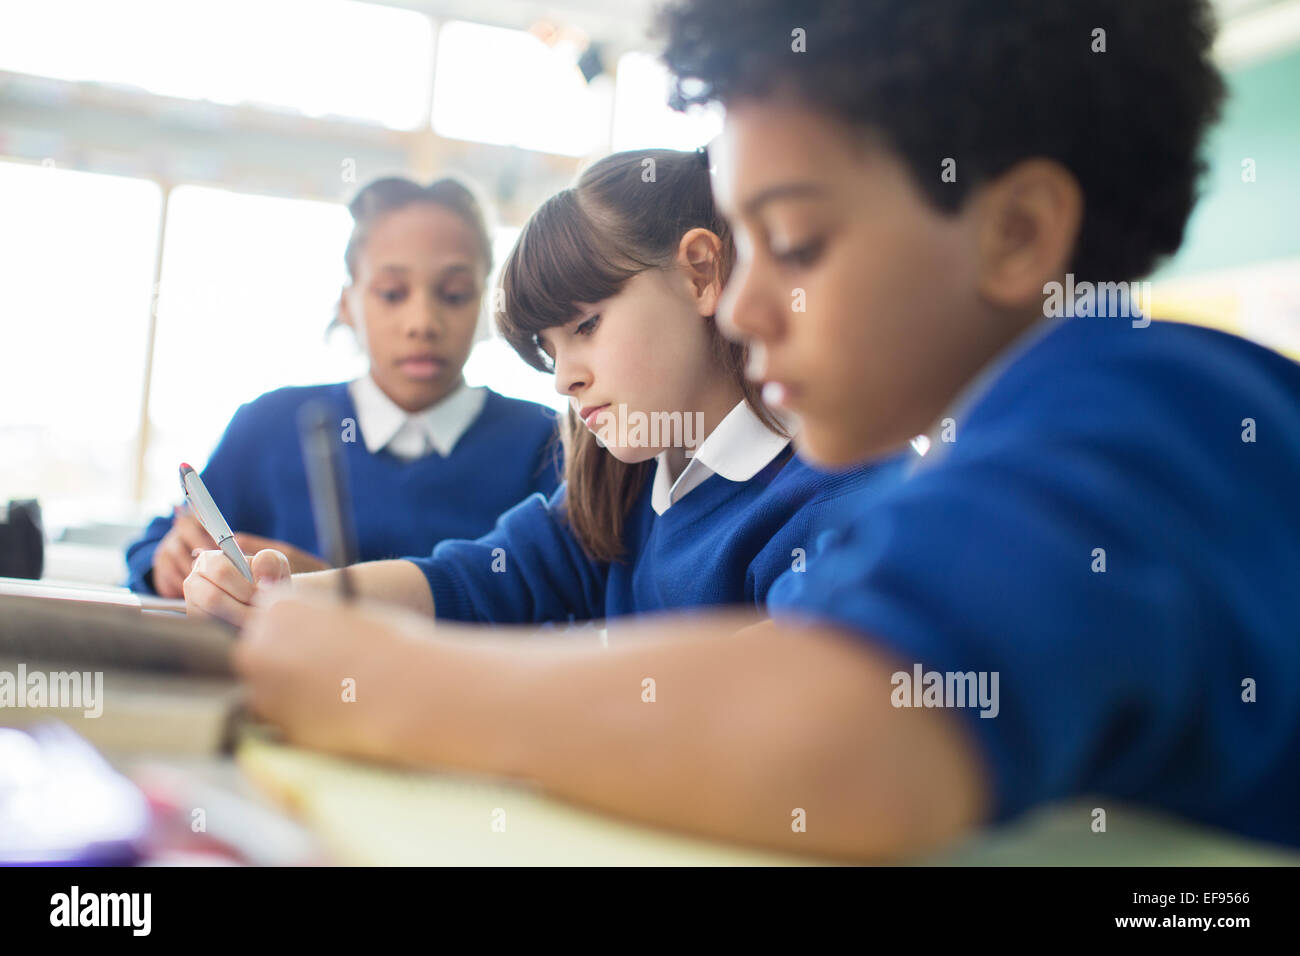 Schoolboys and schoolgirls learning in classroom Stock Photo